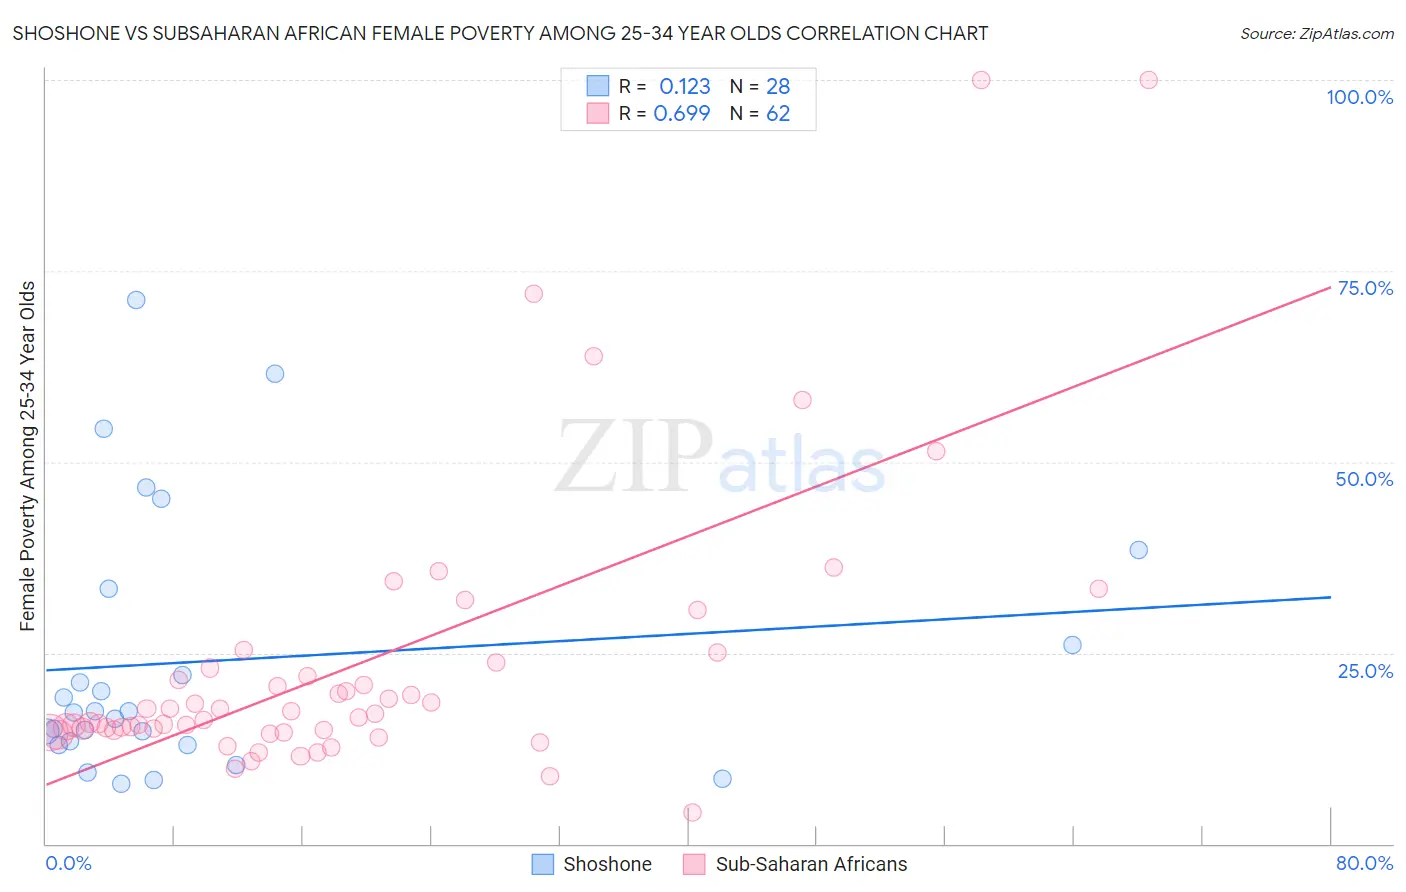 Shoshone vs Subsaharan African Female Poverty Among 25-34 Year Olds